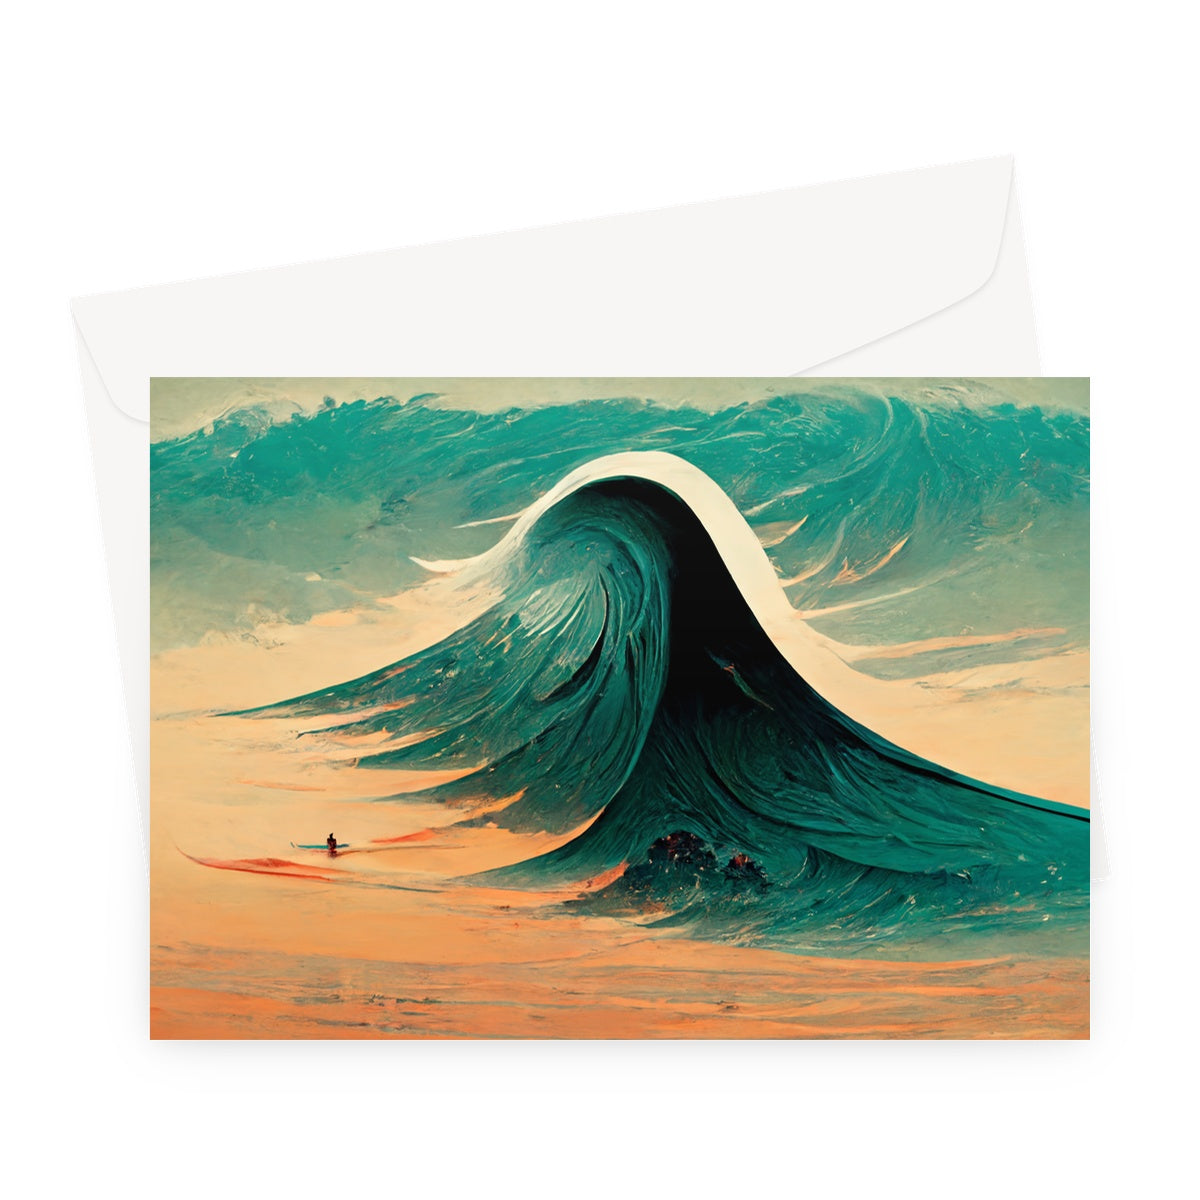 The Swell Greeting Card